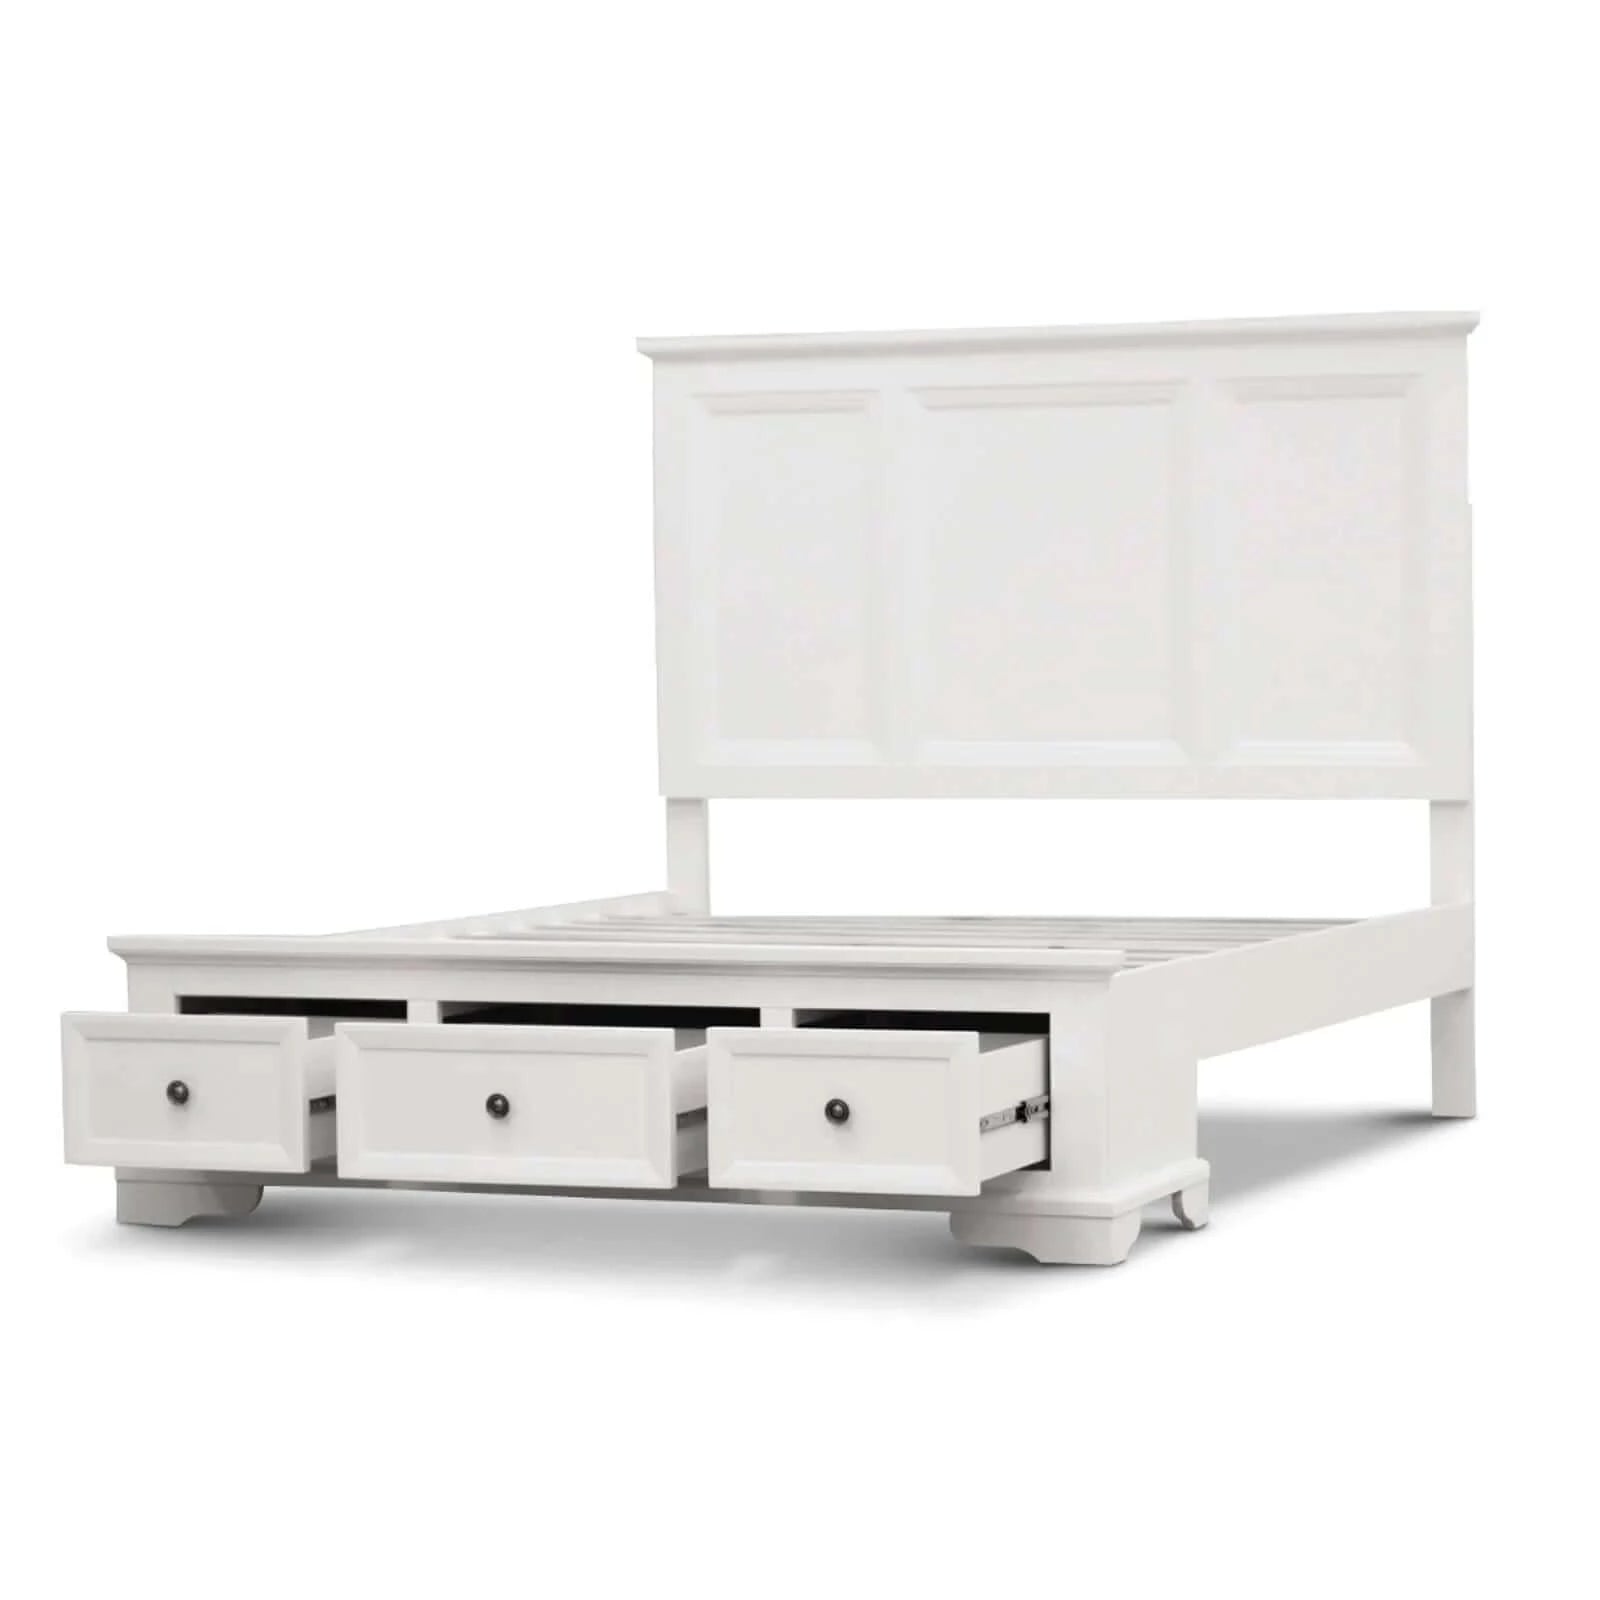 Buy celosia king size bed frame timber mattress base with storage drawers - white - upinteriors-Upinteriors